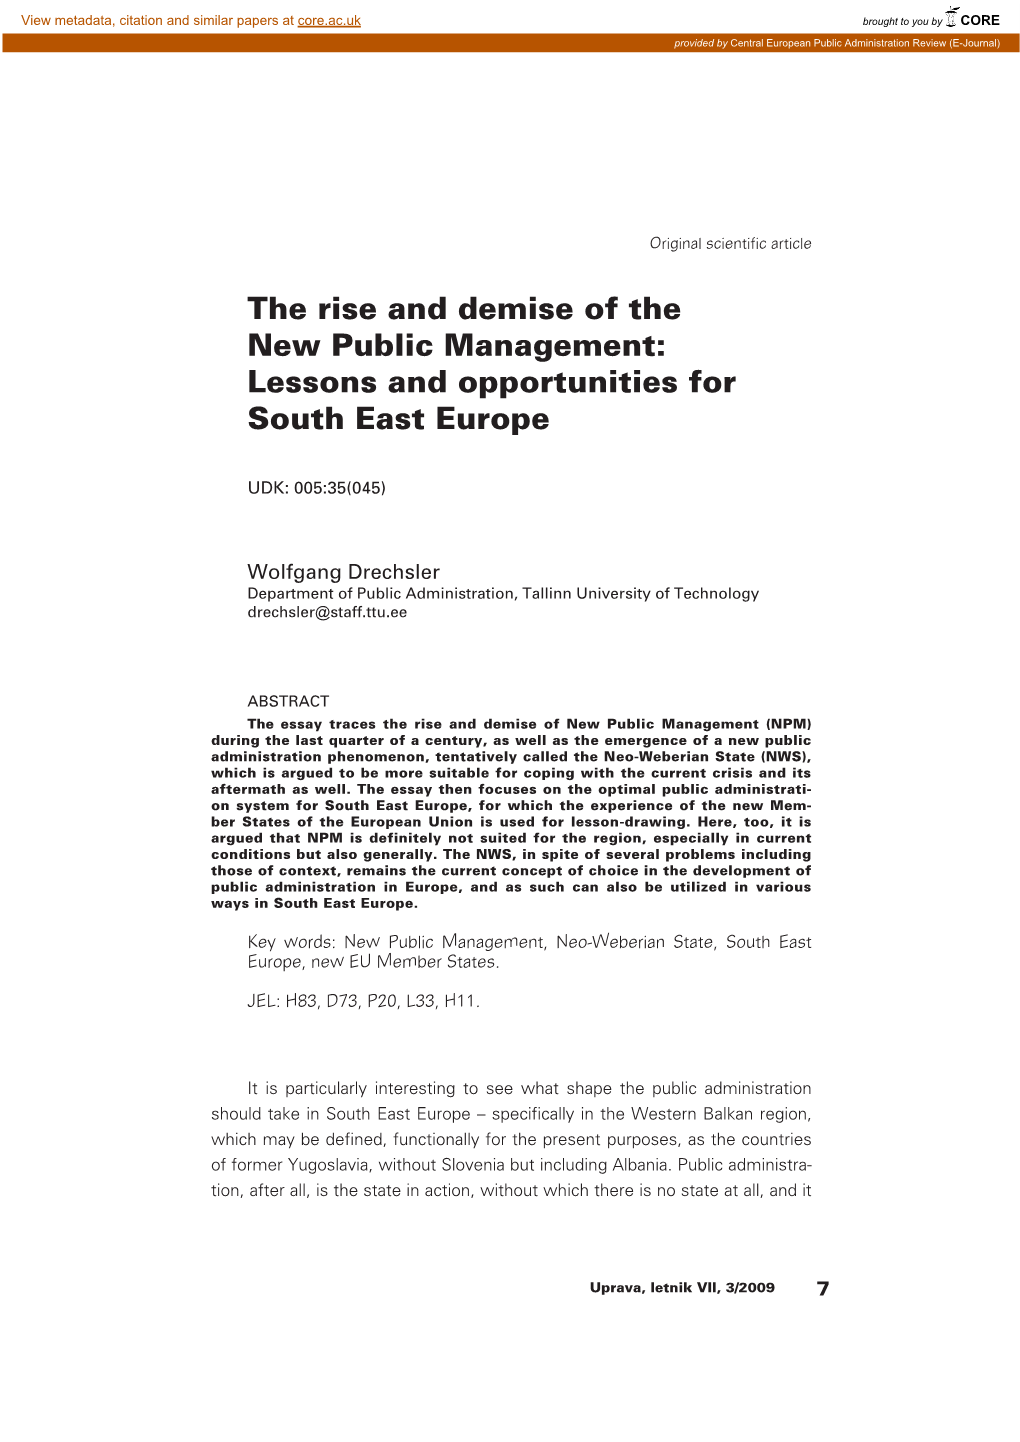 The Rise and Demise of the New Public Management: Lessons and Opportunities for South East Europe